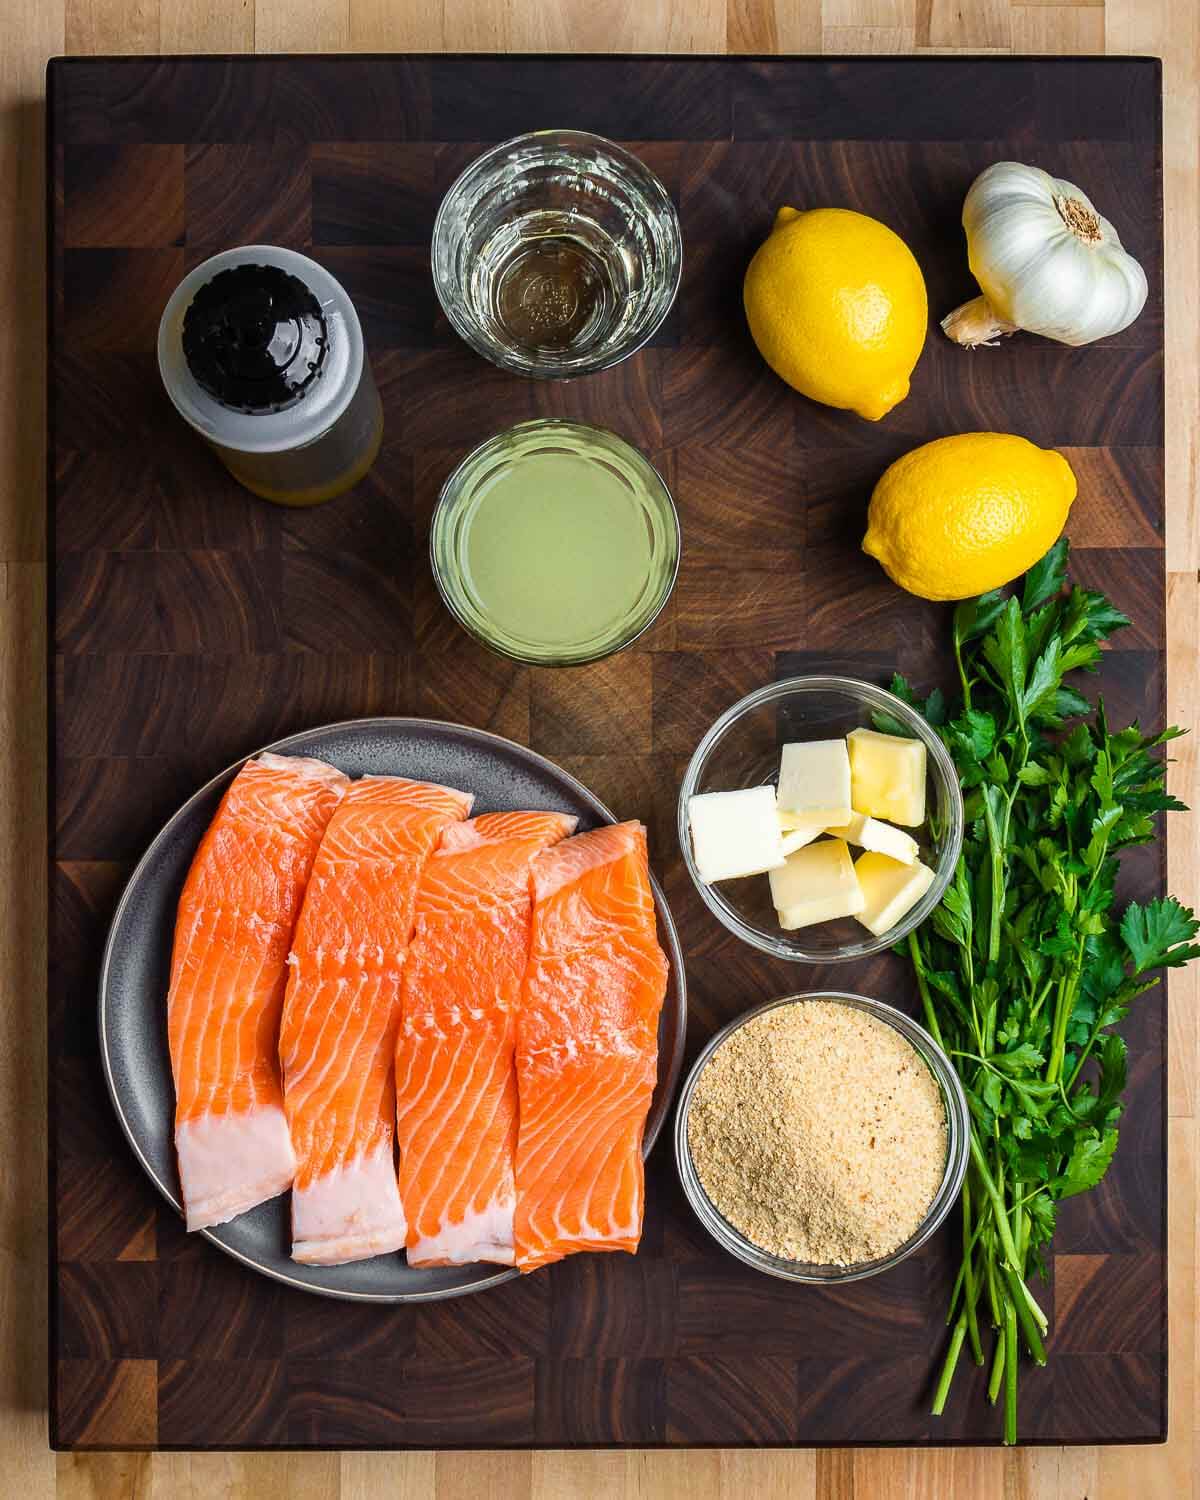 Ingredients shown: olive oil, white wine, chicken stock, lemons, garlic, salmon, butter, breadcrumbs, and parsley.